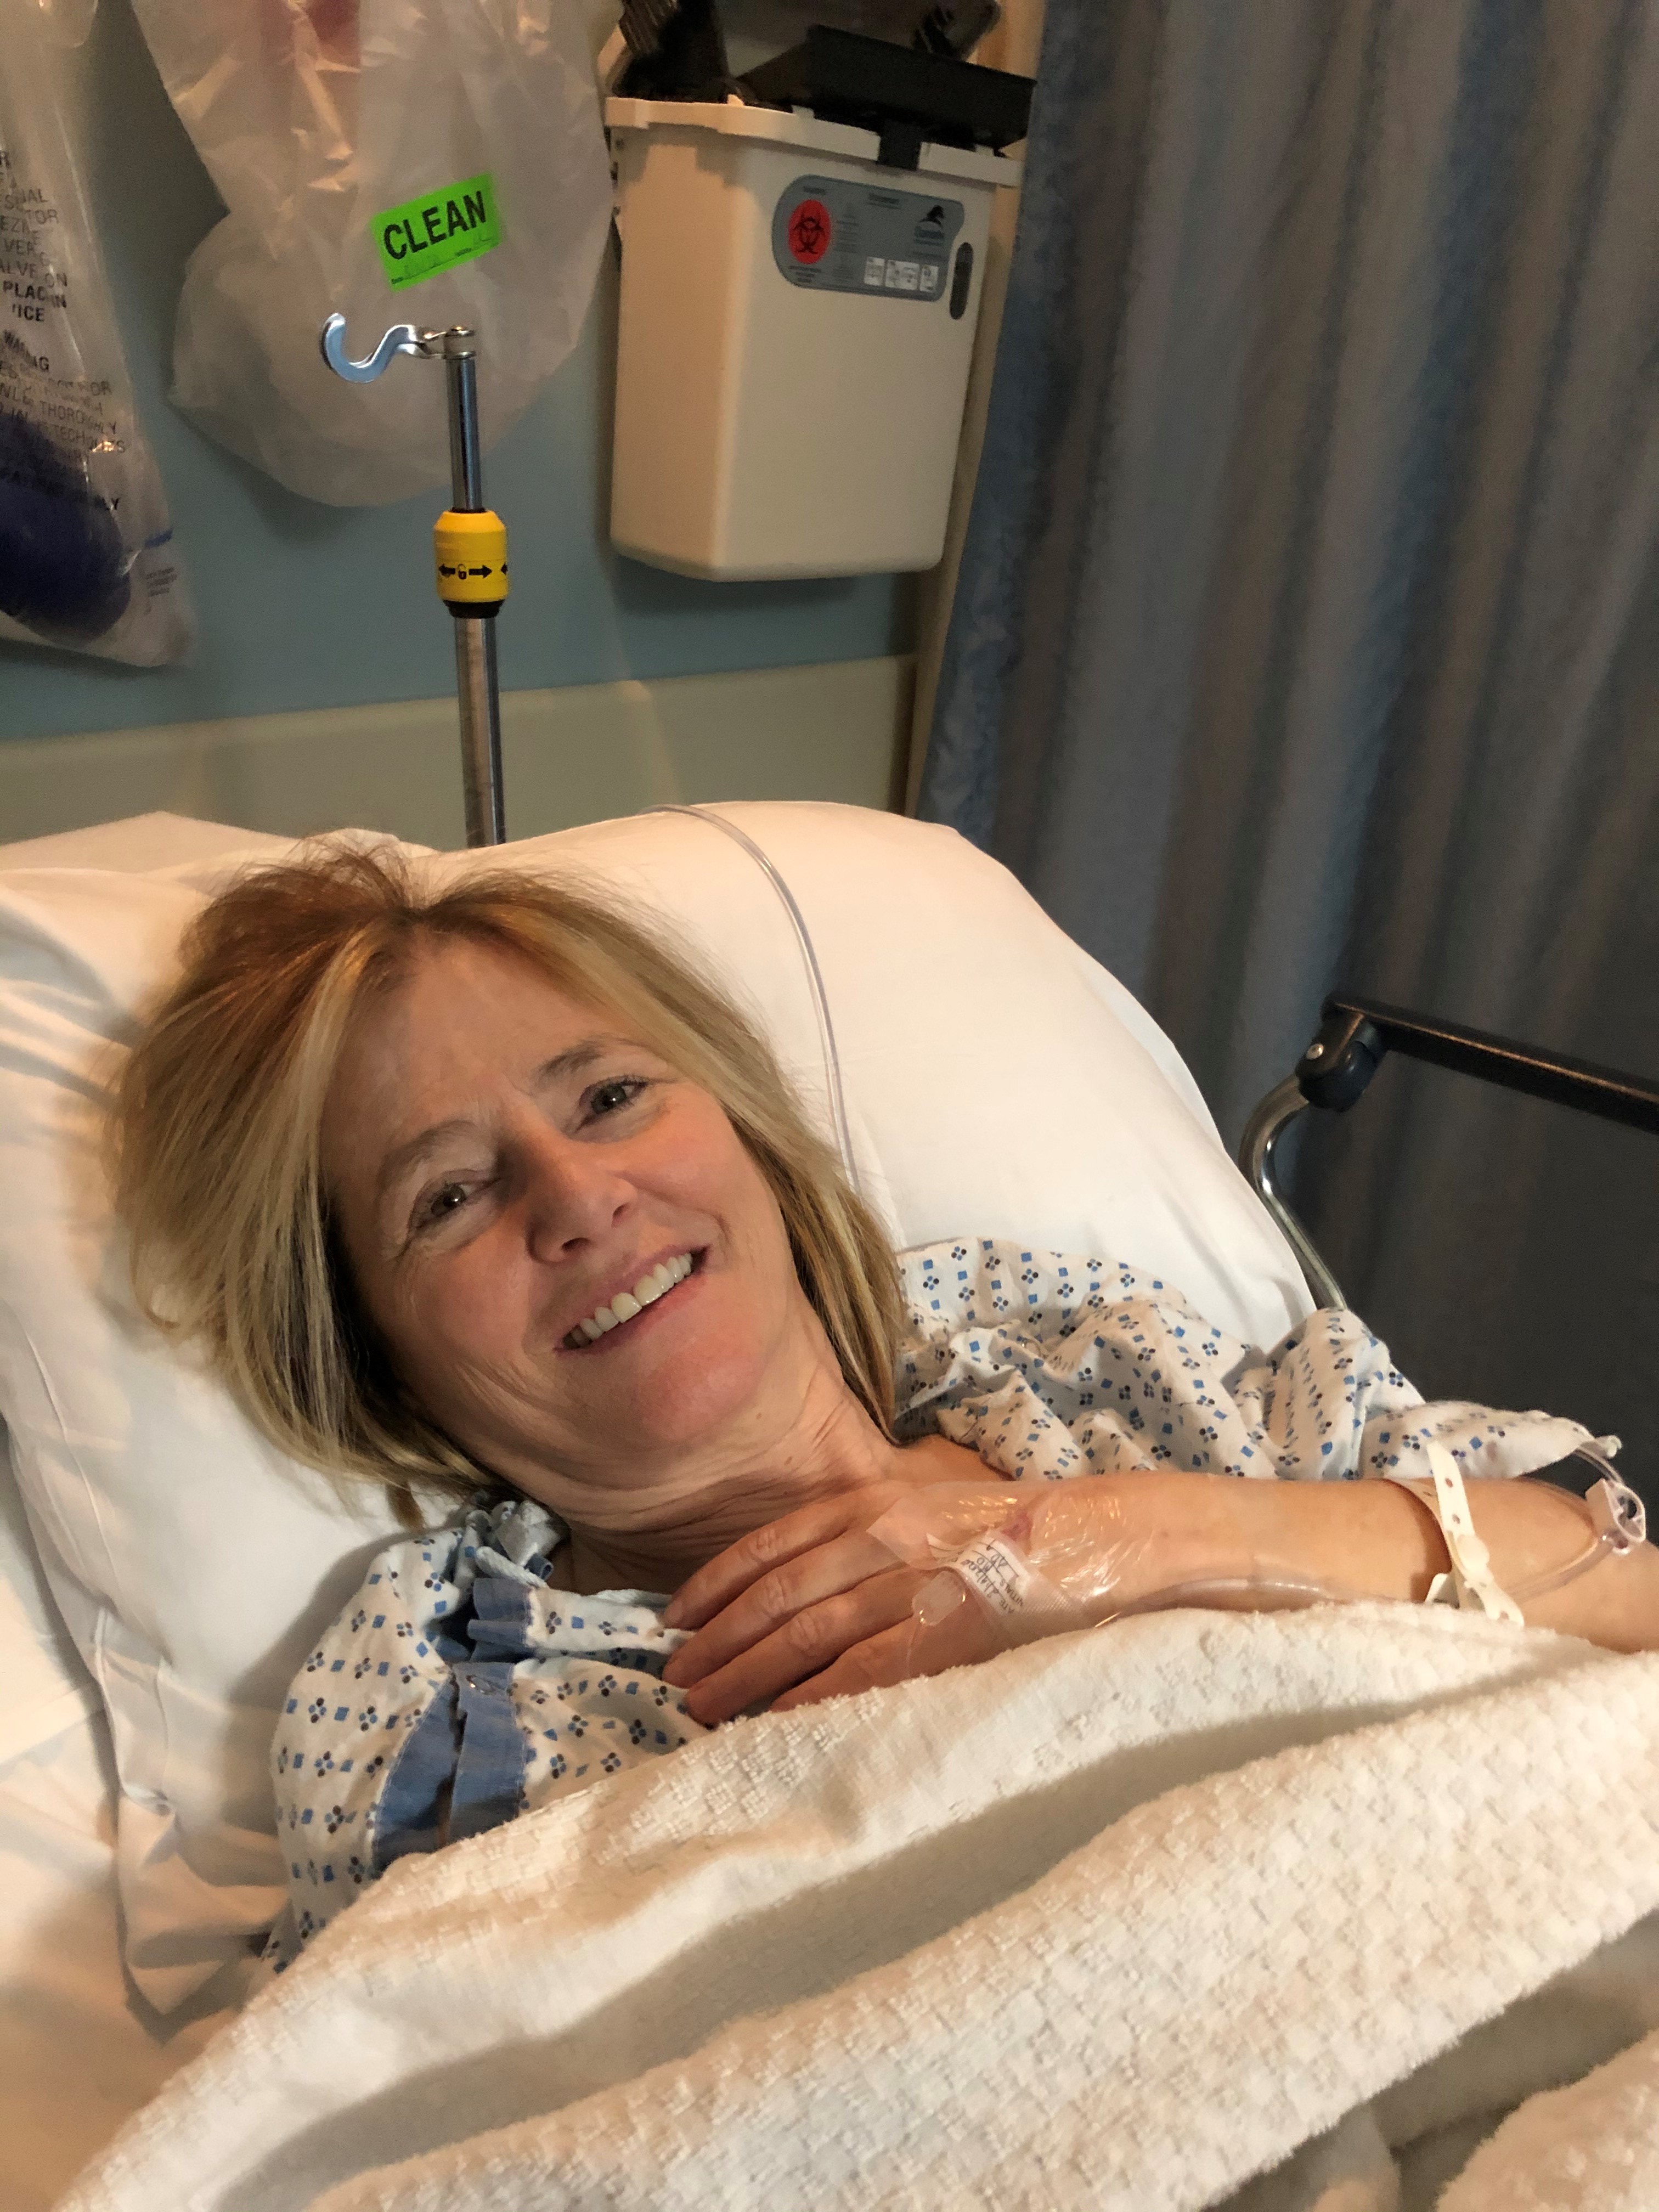 Brenda Collins recovers after her first spray cryotherapy treatment at Vassar Brothers Medical Center. Brenda said, “I was SO happy to be able to breathe again!”